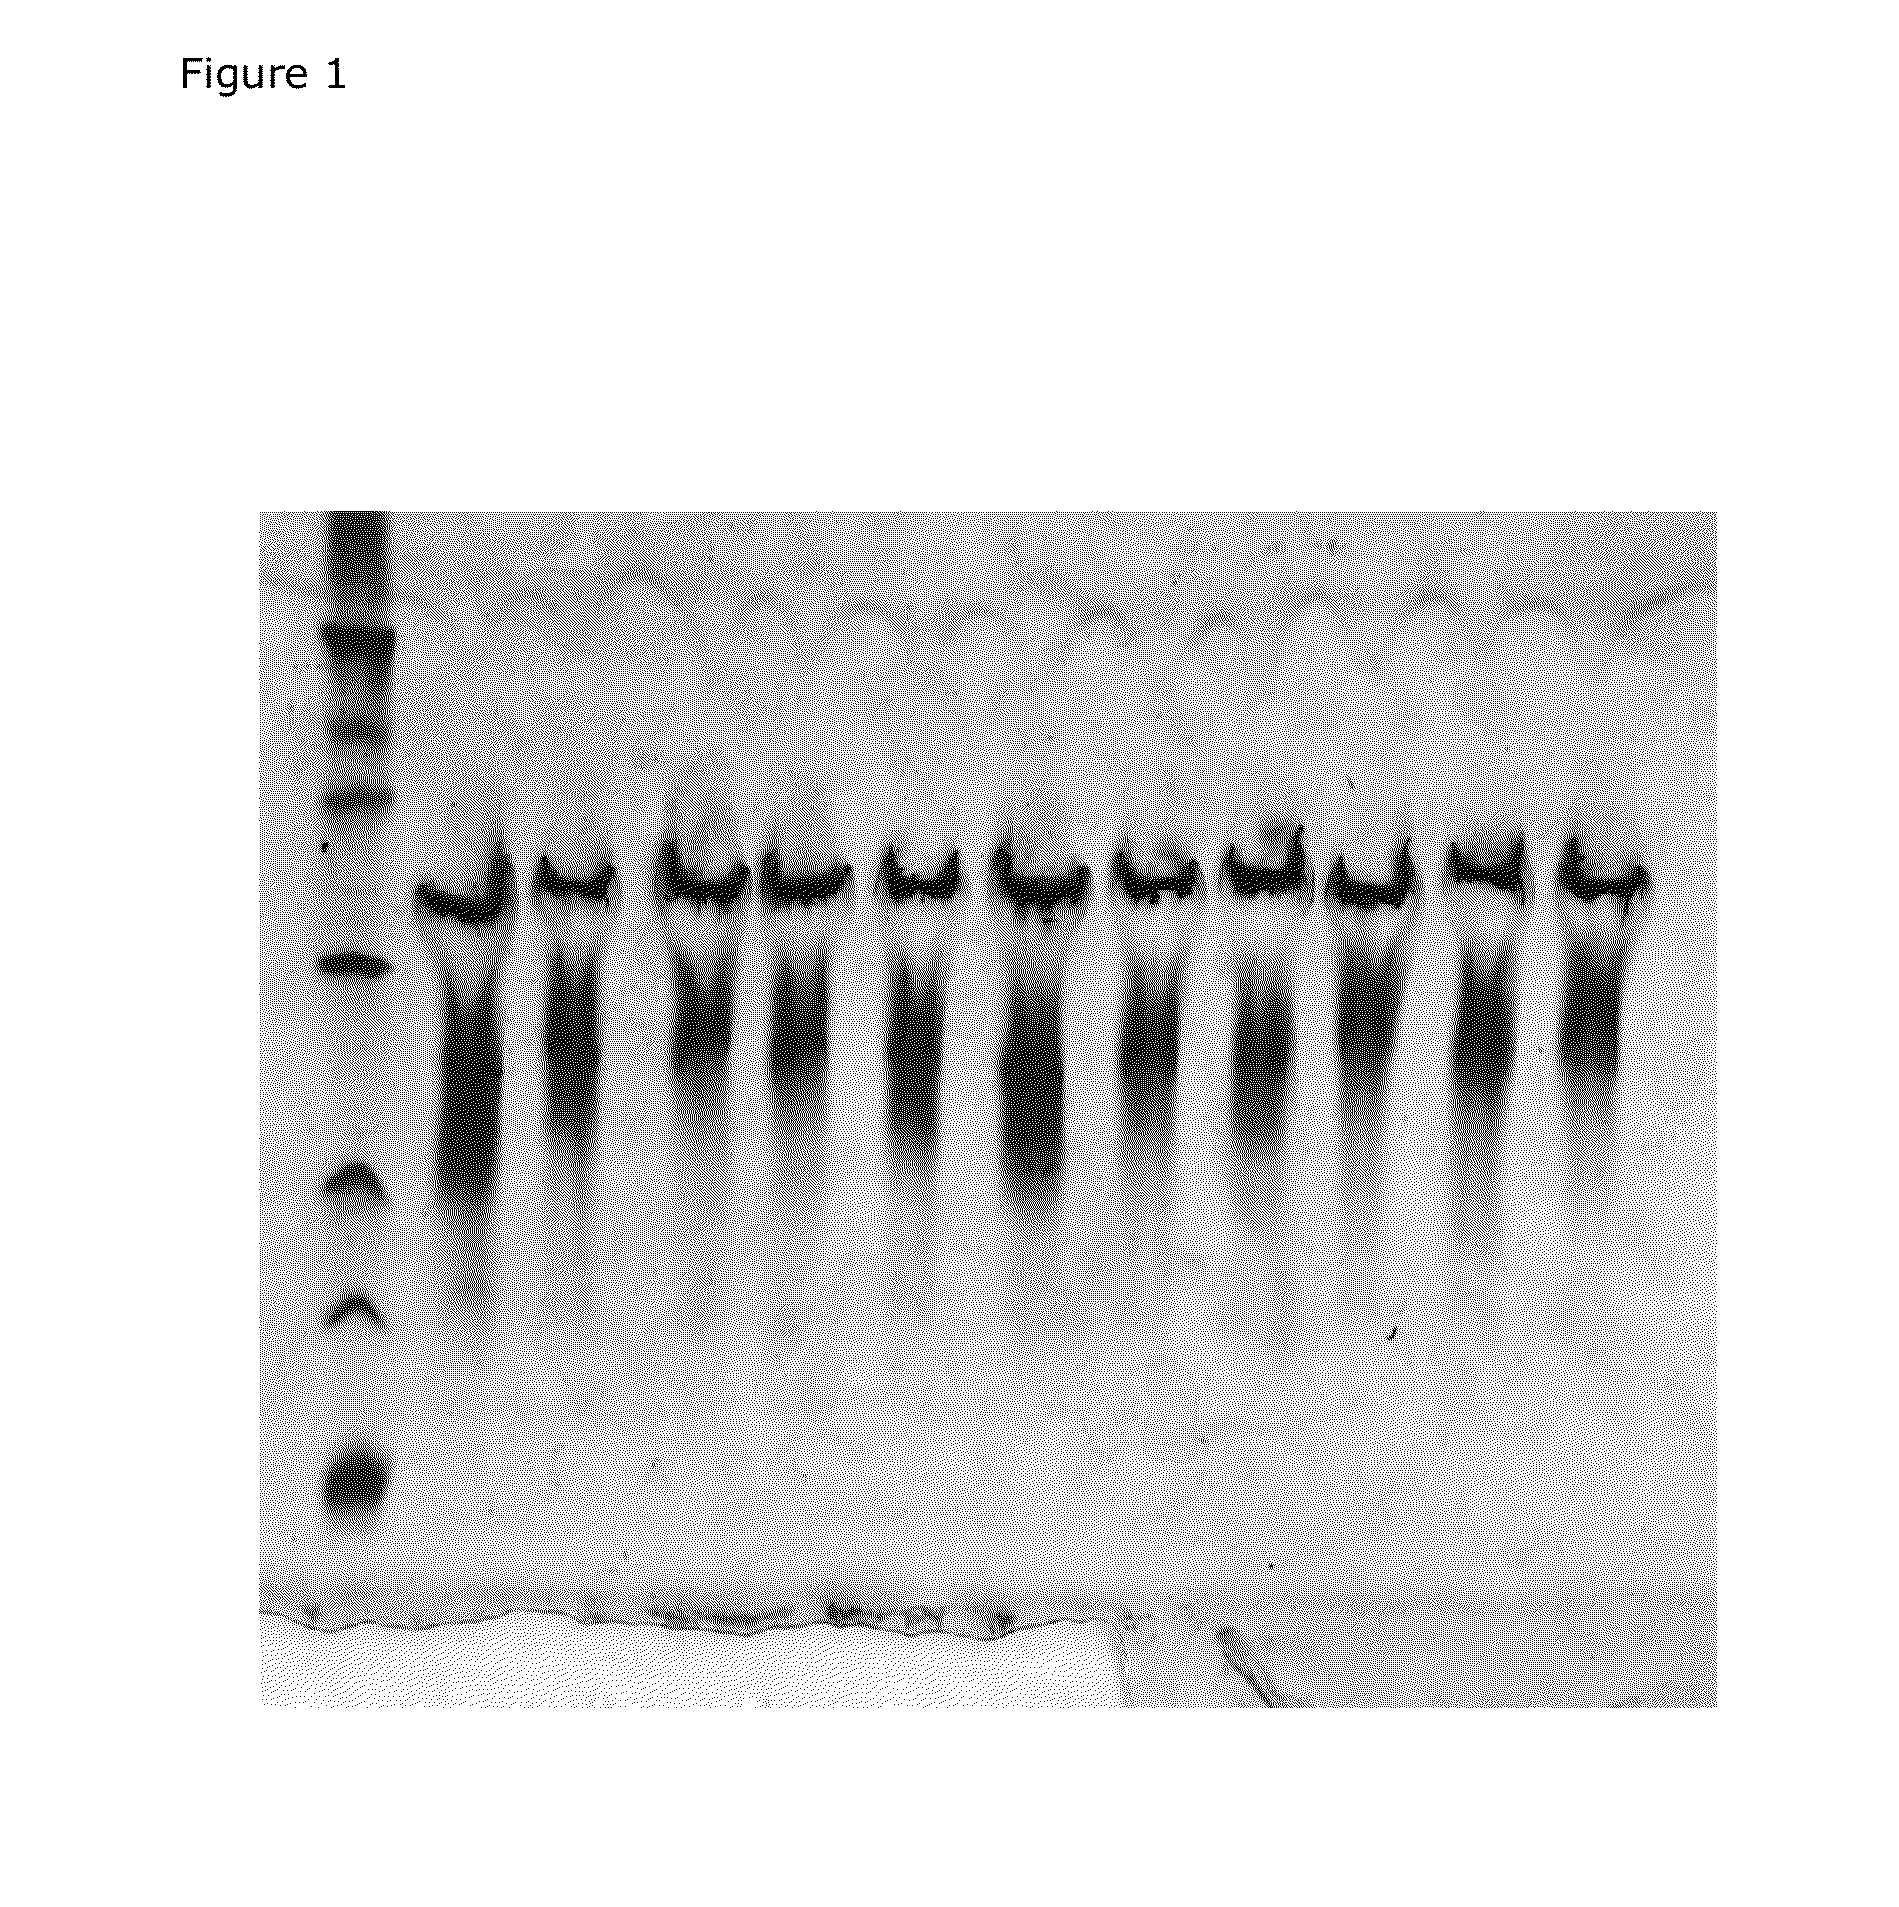 Method for Producing an Acidified Milk Drink